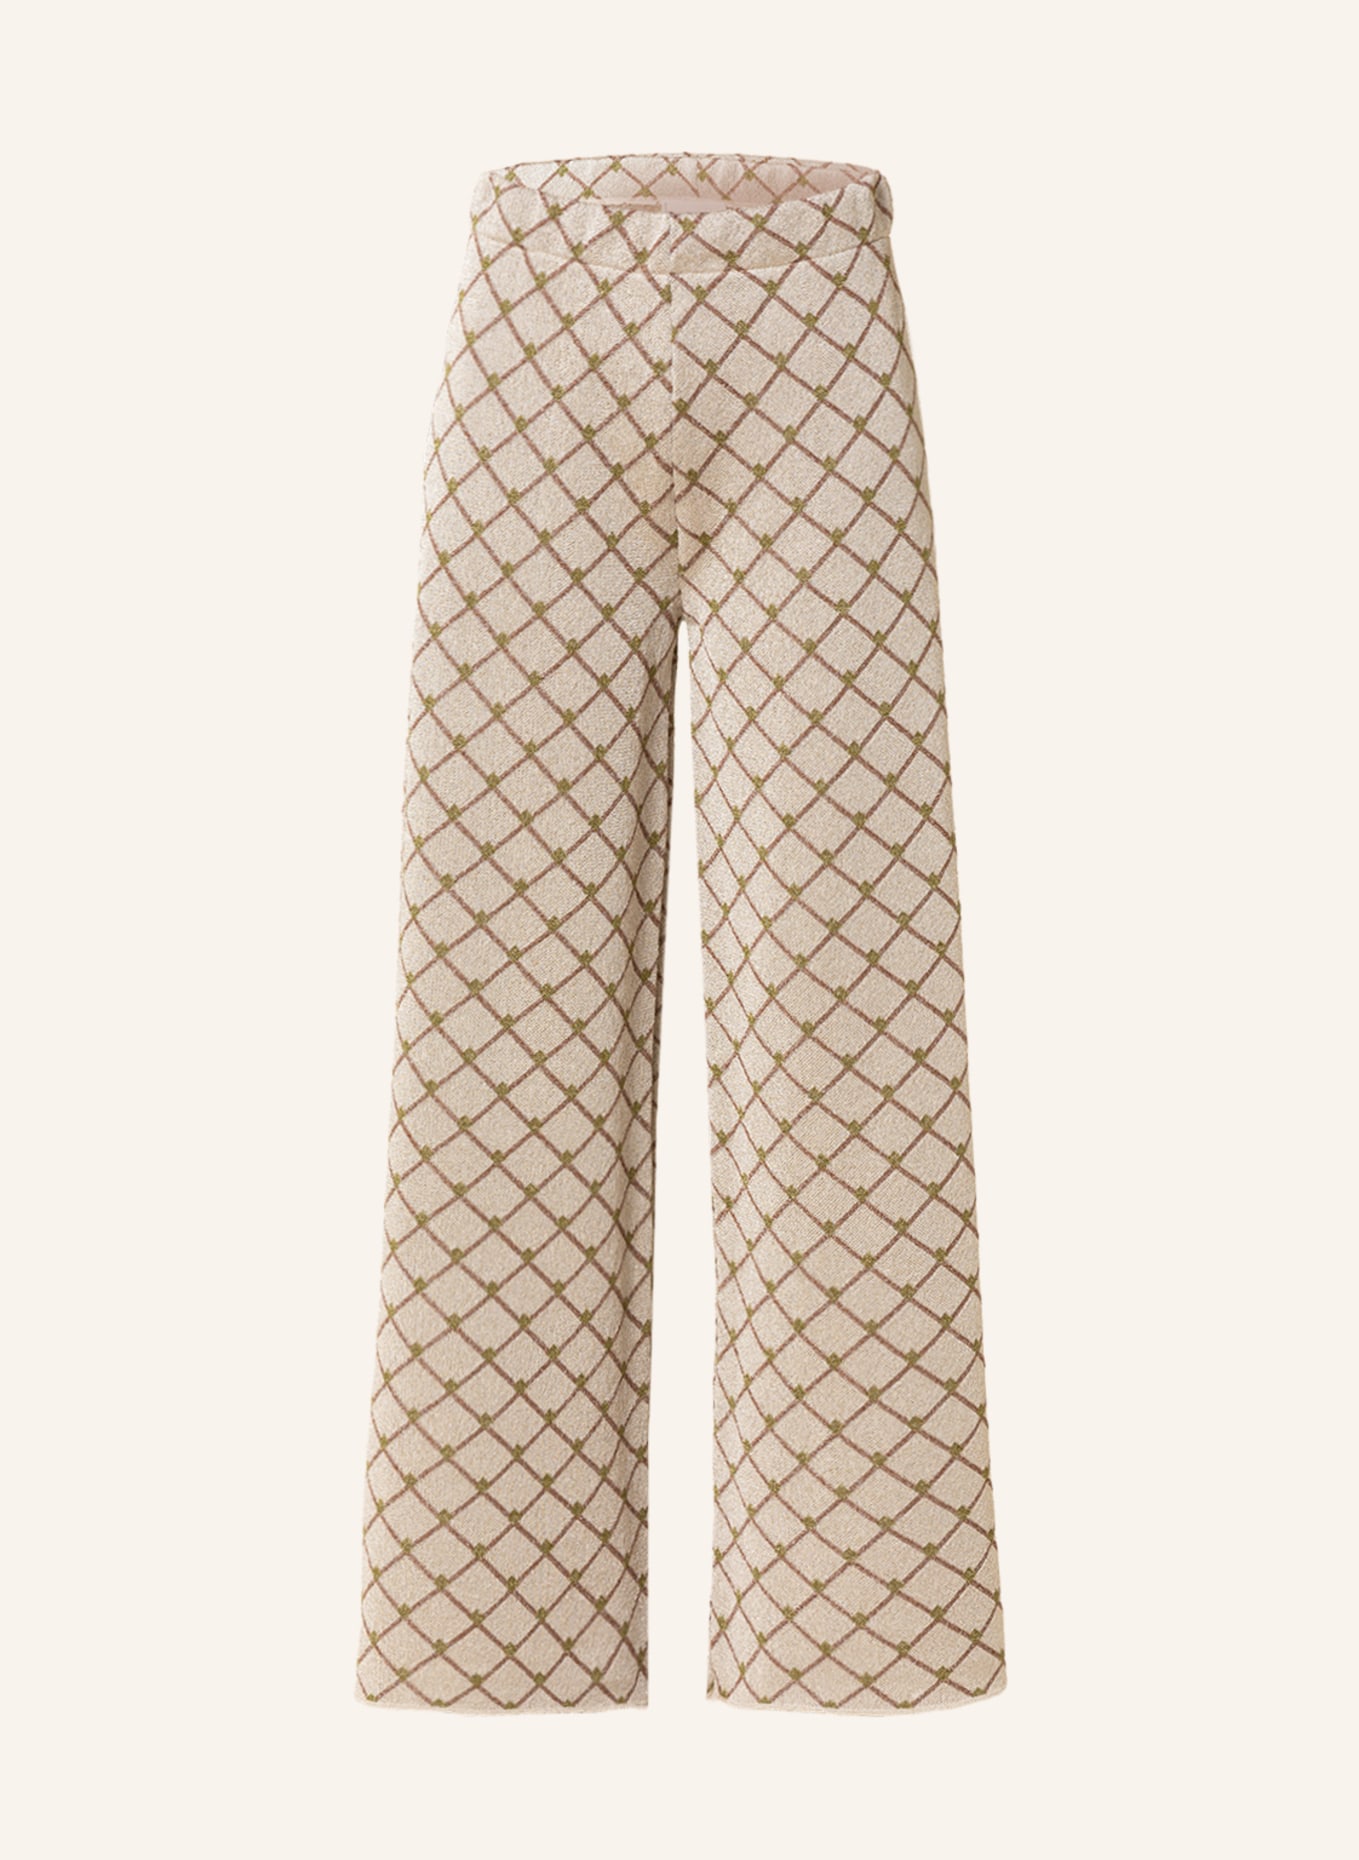 SEM PER LEI Knit trousers with glitter thread, Color: CREAM/ LIGHT BROWN (Image 1)